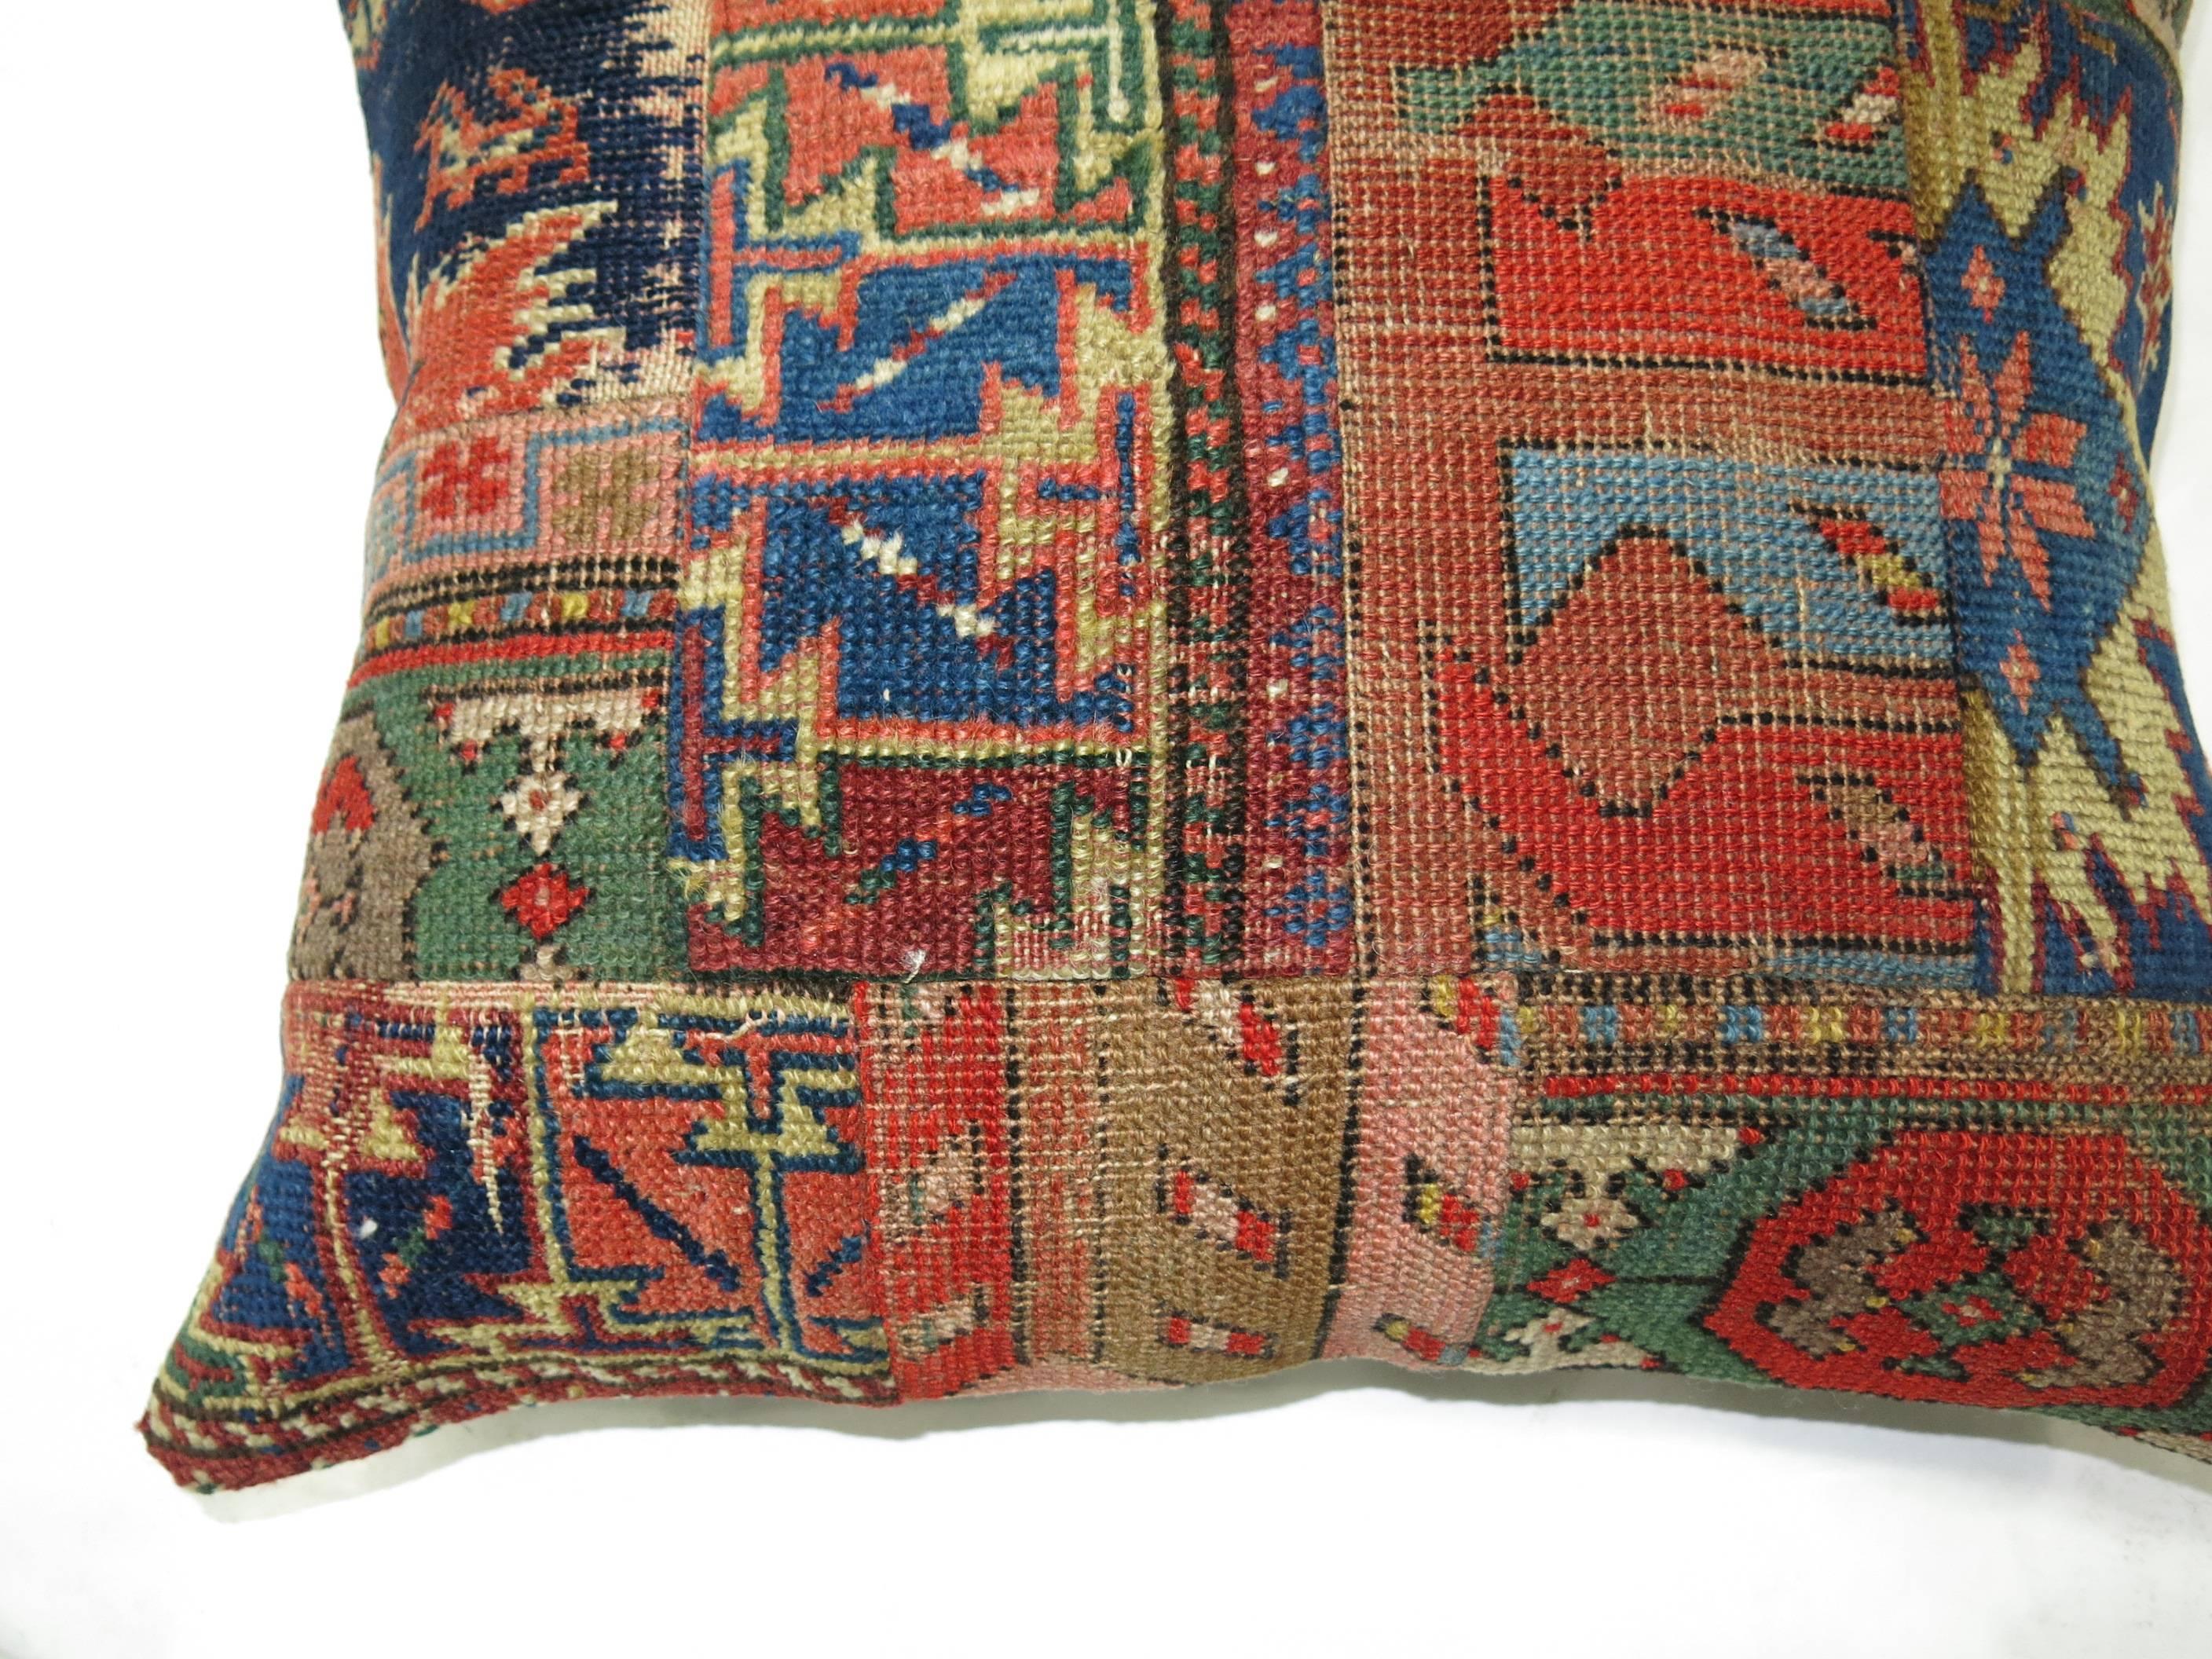 Pillow made from an assortment of antique Persian and tribal Caucasian rugs.